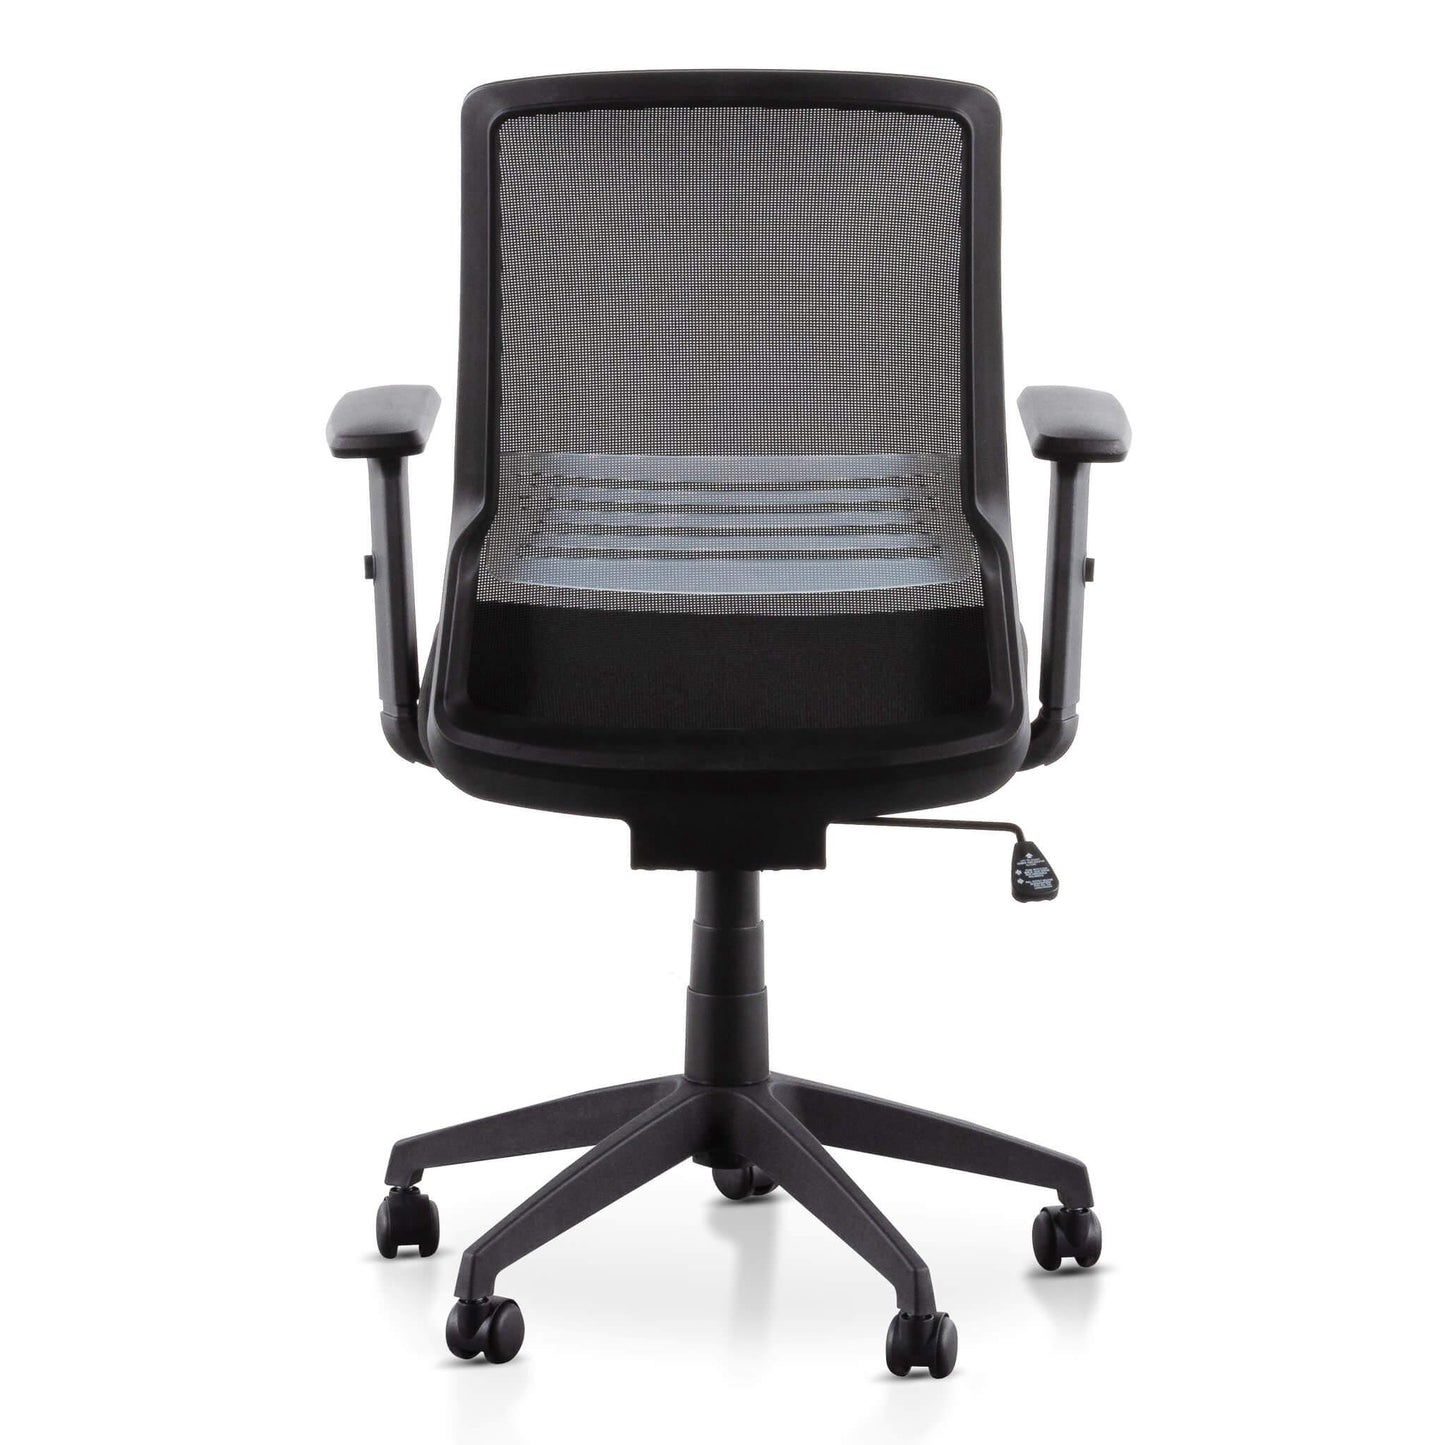 Calibre Mesh Office Chair - Full Black OC6207-LF - Office/Gaming ChairsOC6207-LF 4